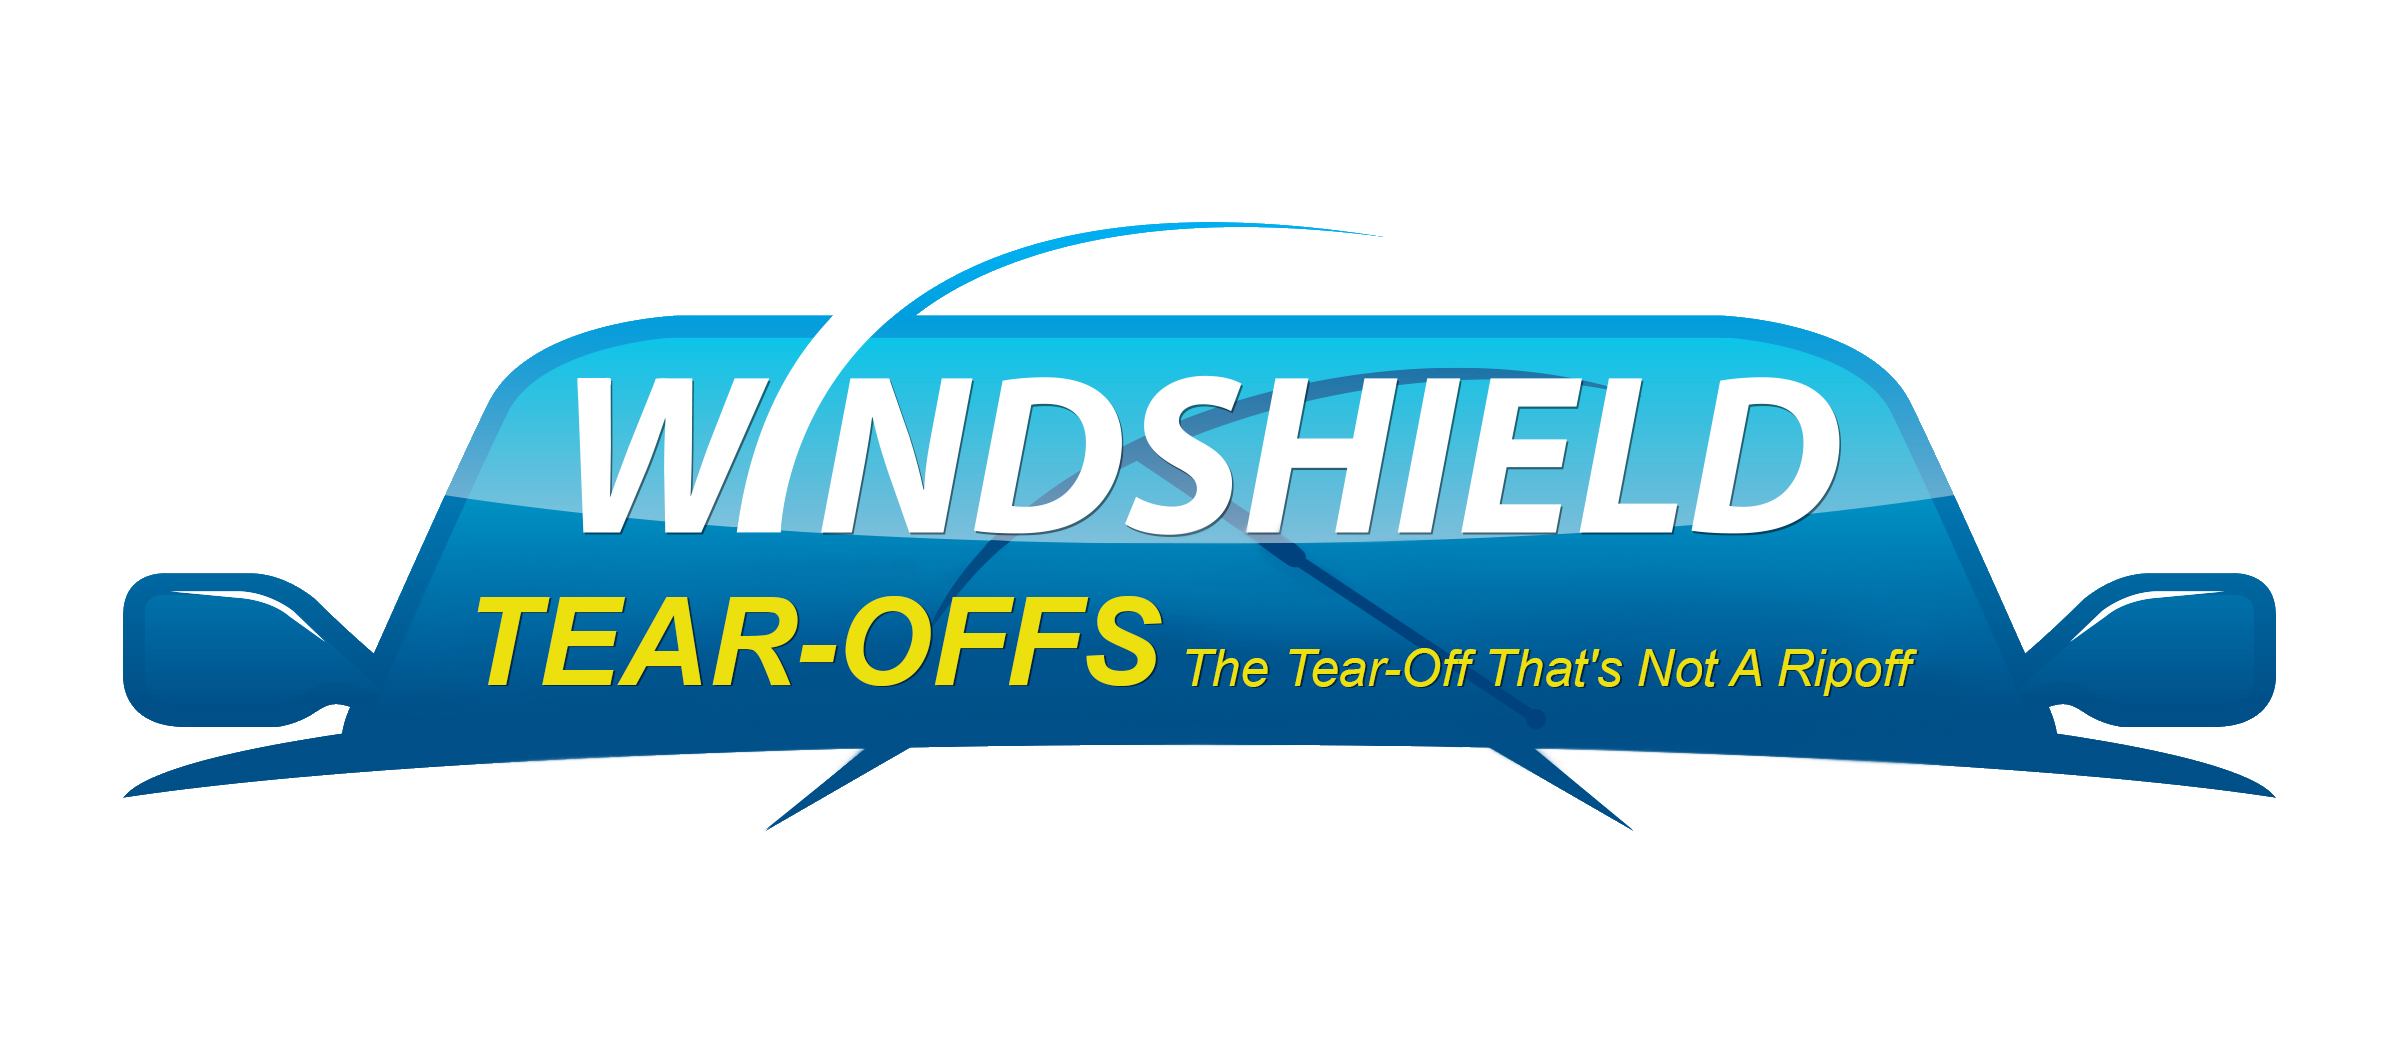 Protect your car's windshield and save more money with the Windshield Tear-Off!